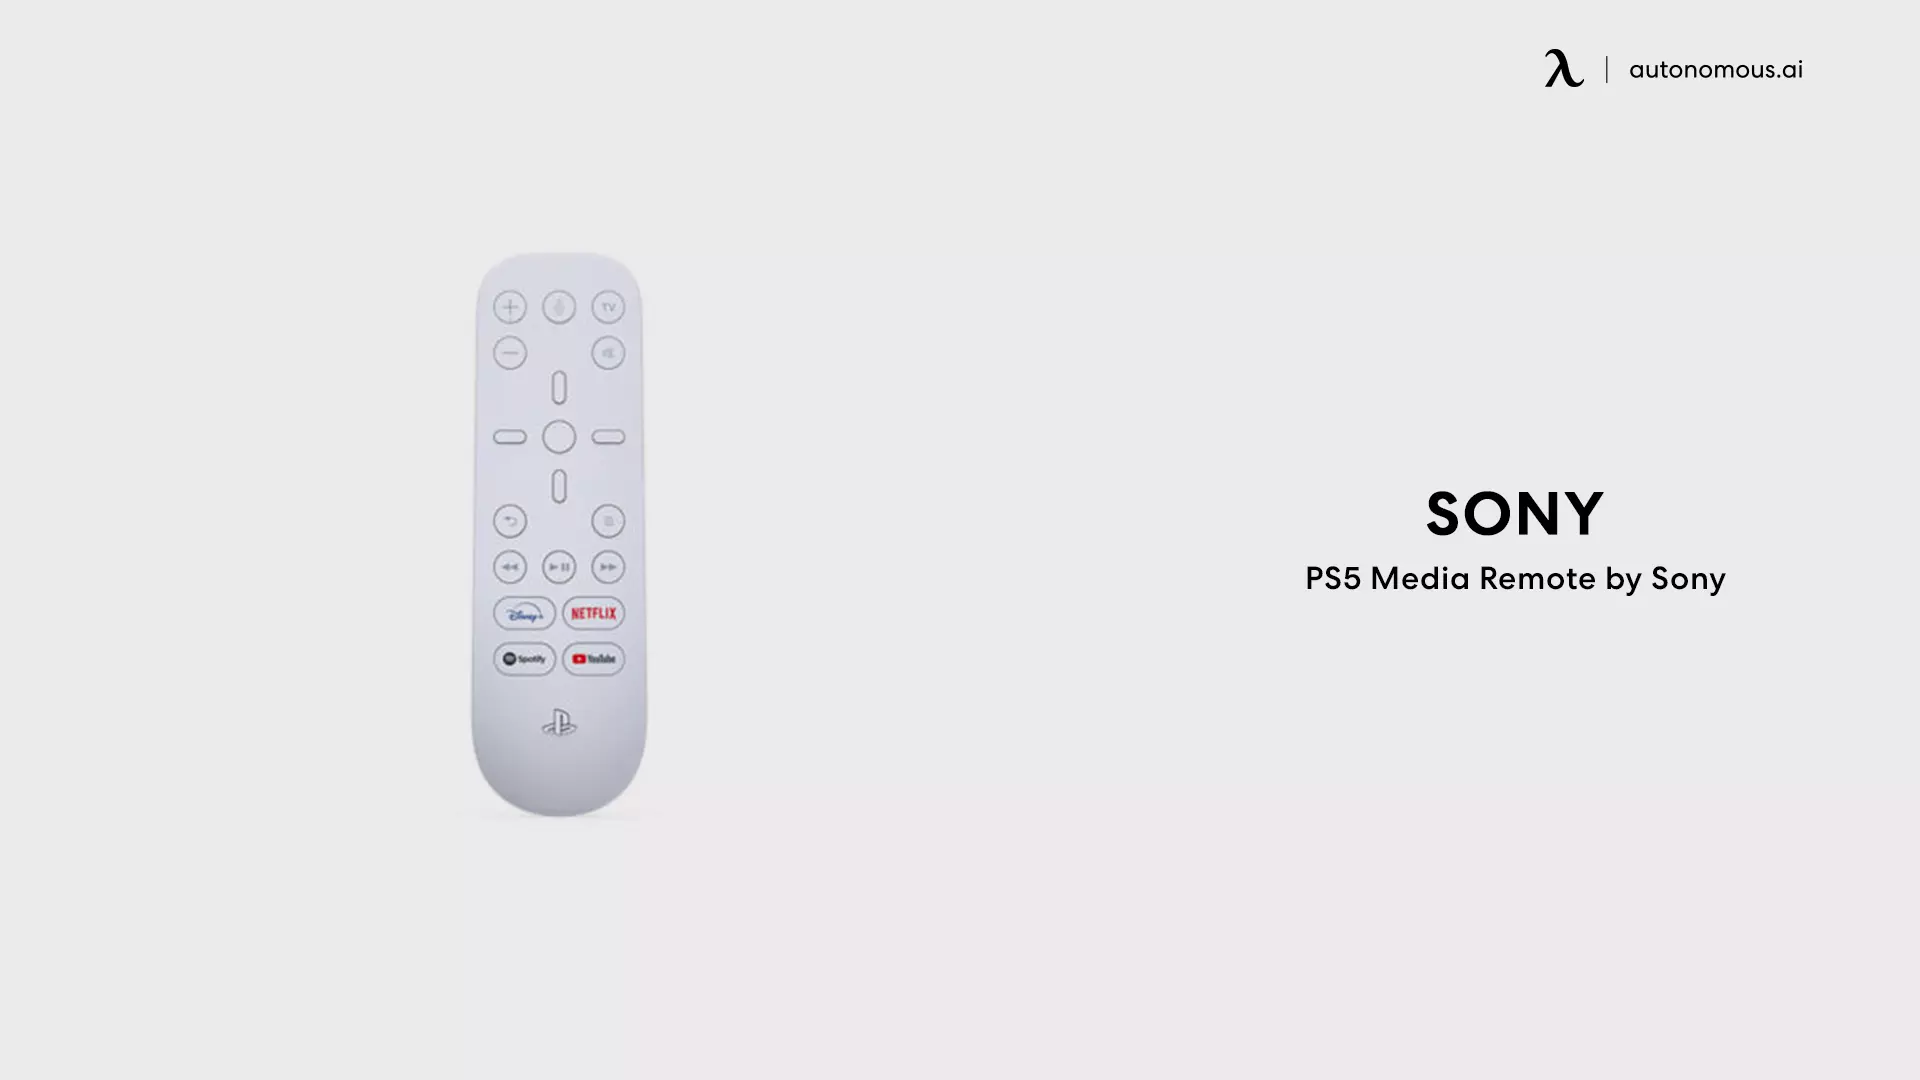 PS5 Media Remote by Sony